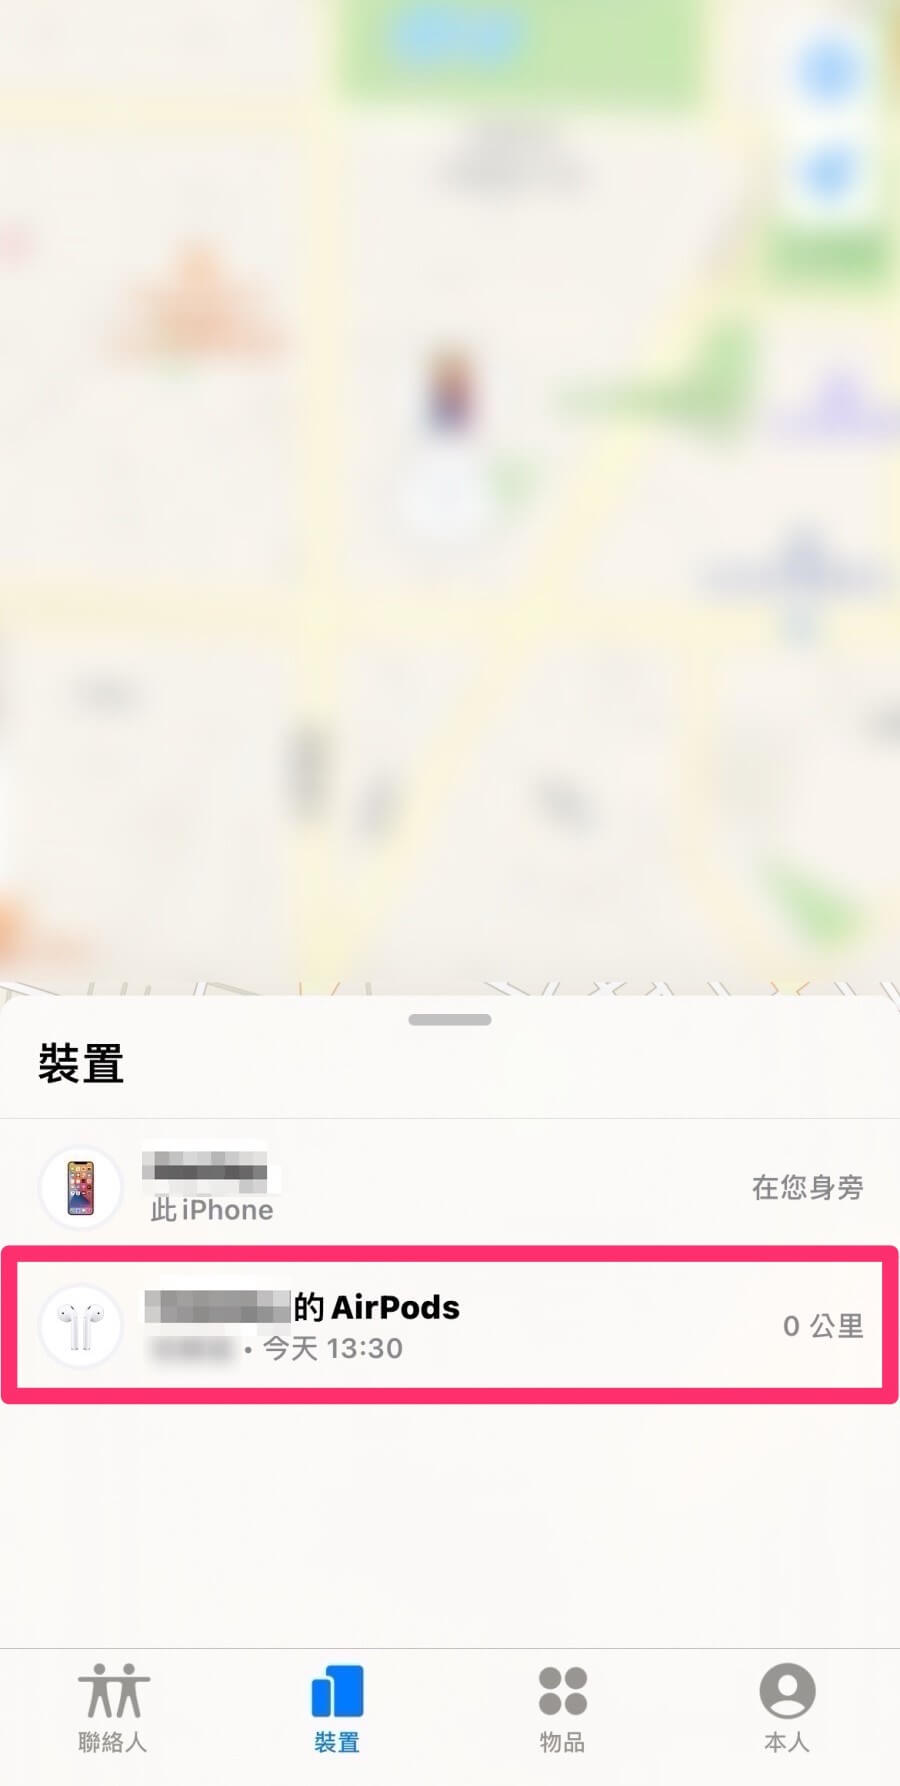 AirPods 遺失尋找